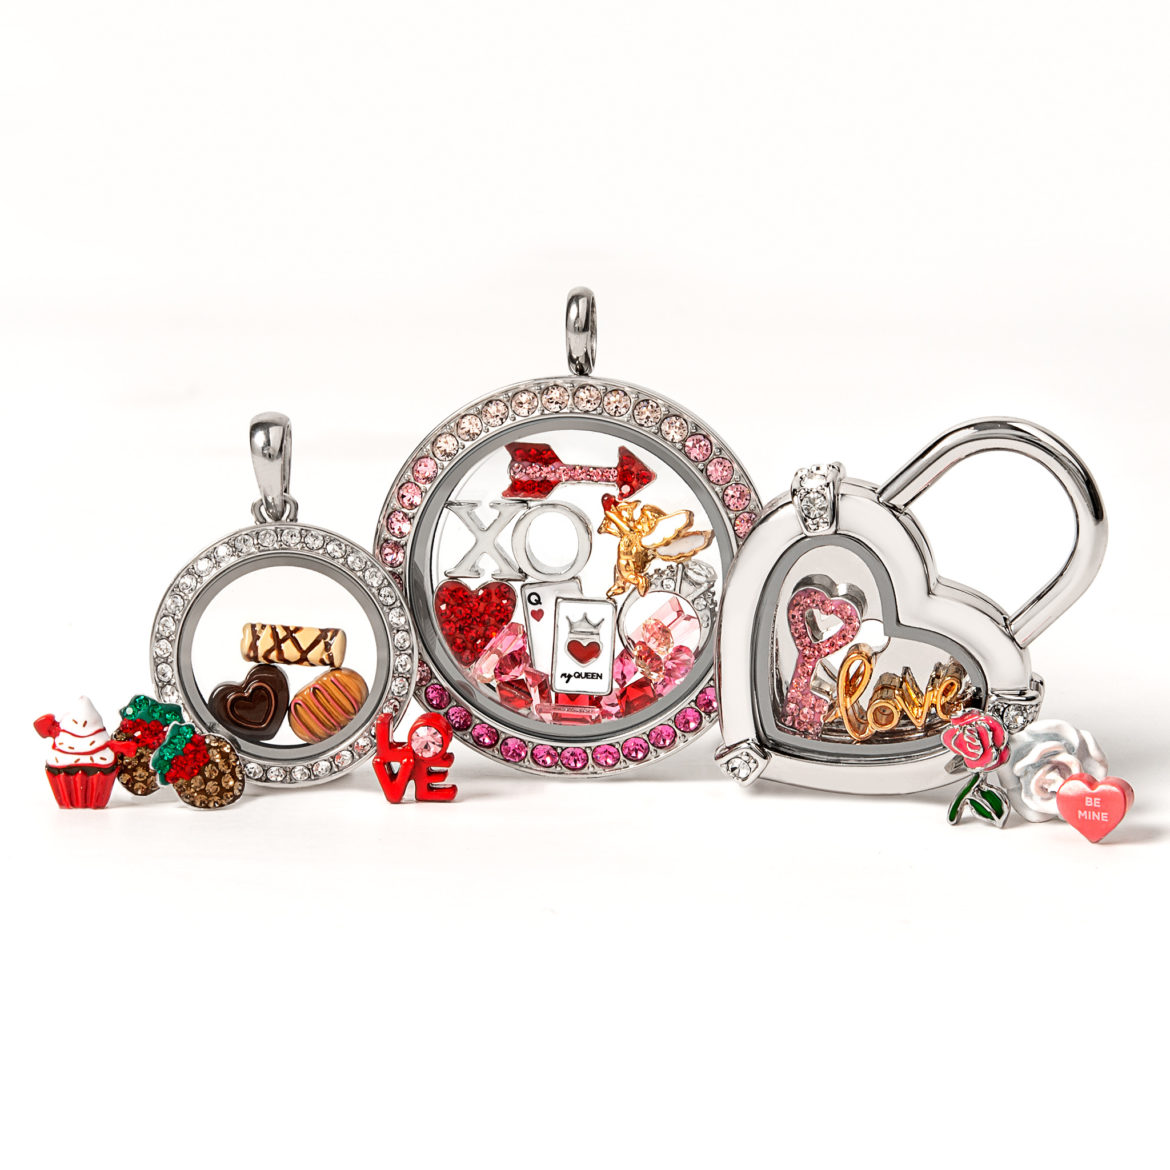 Origami Owl Limited Edition Valentine’s Collection 2020